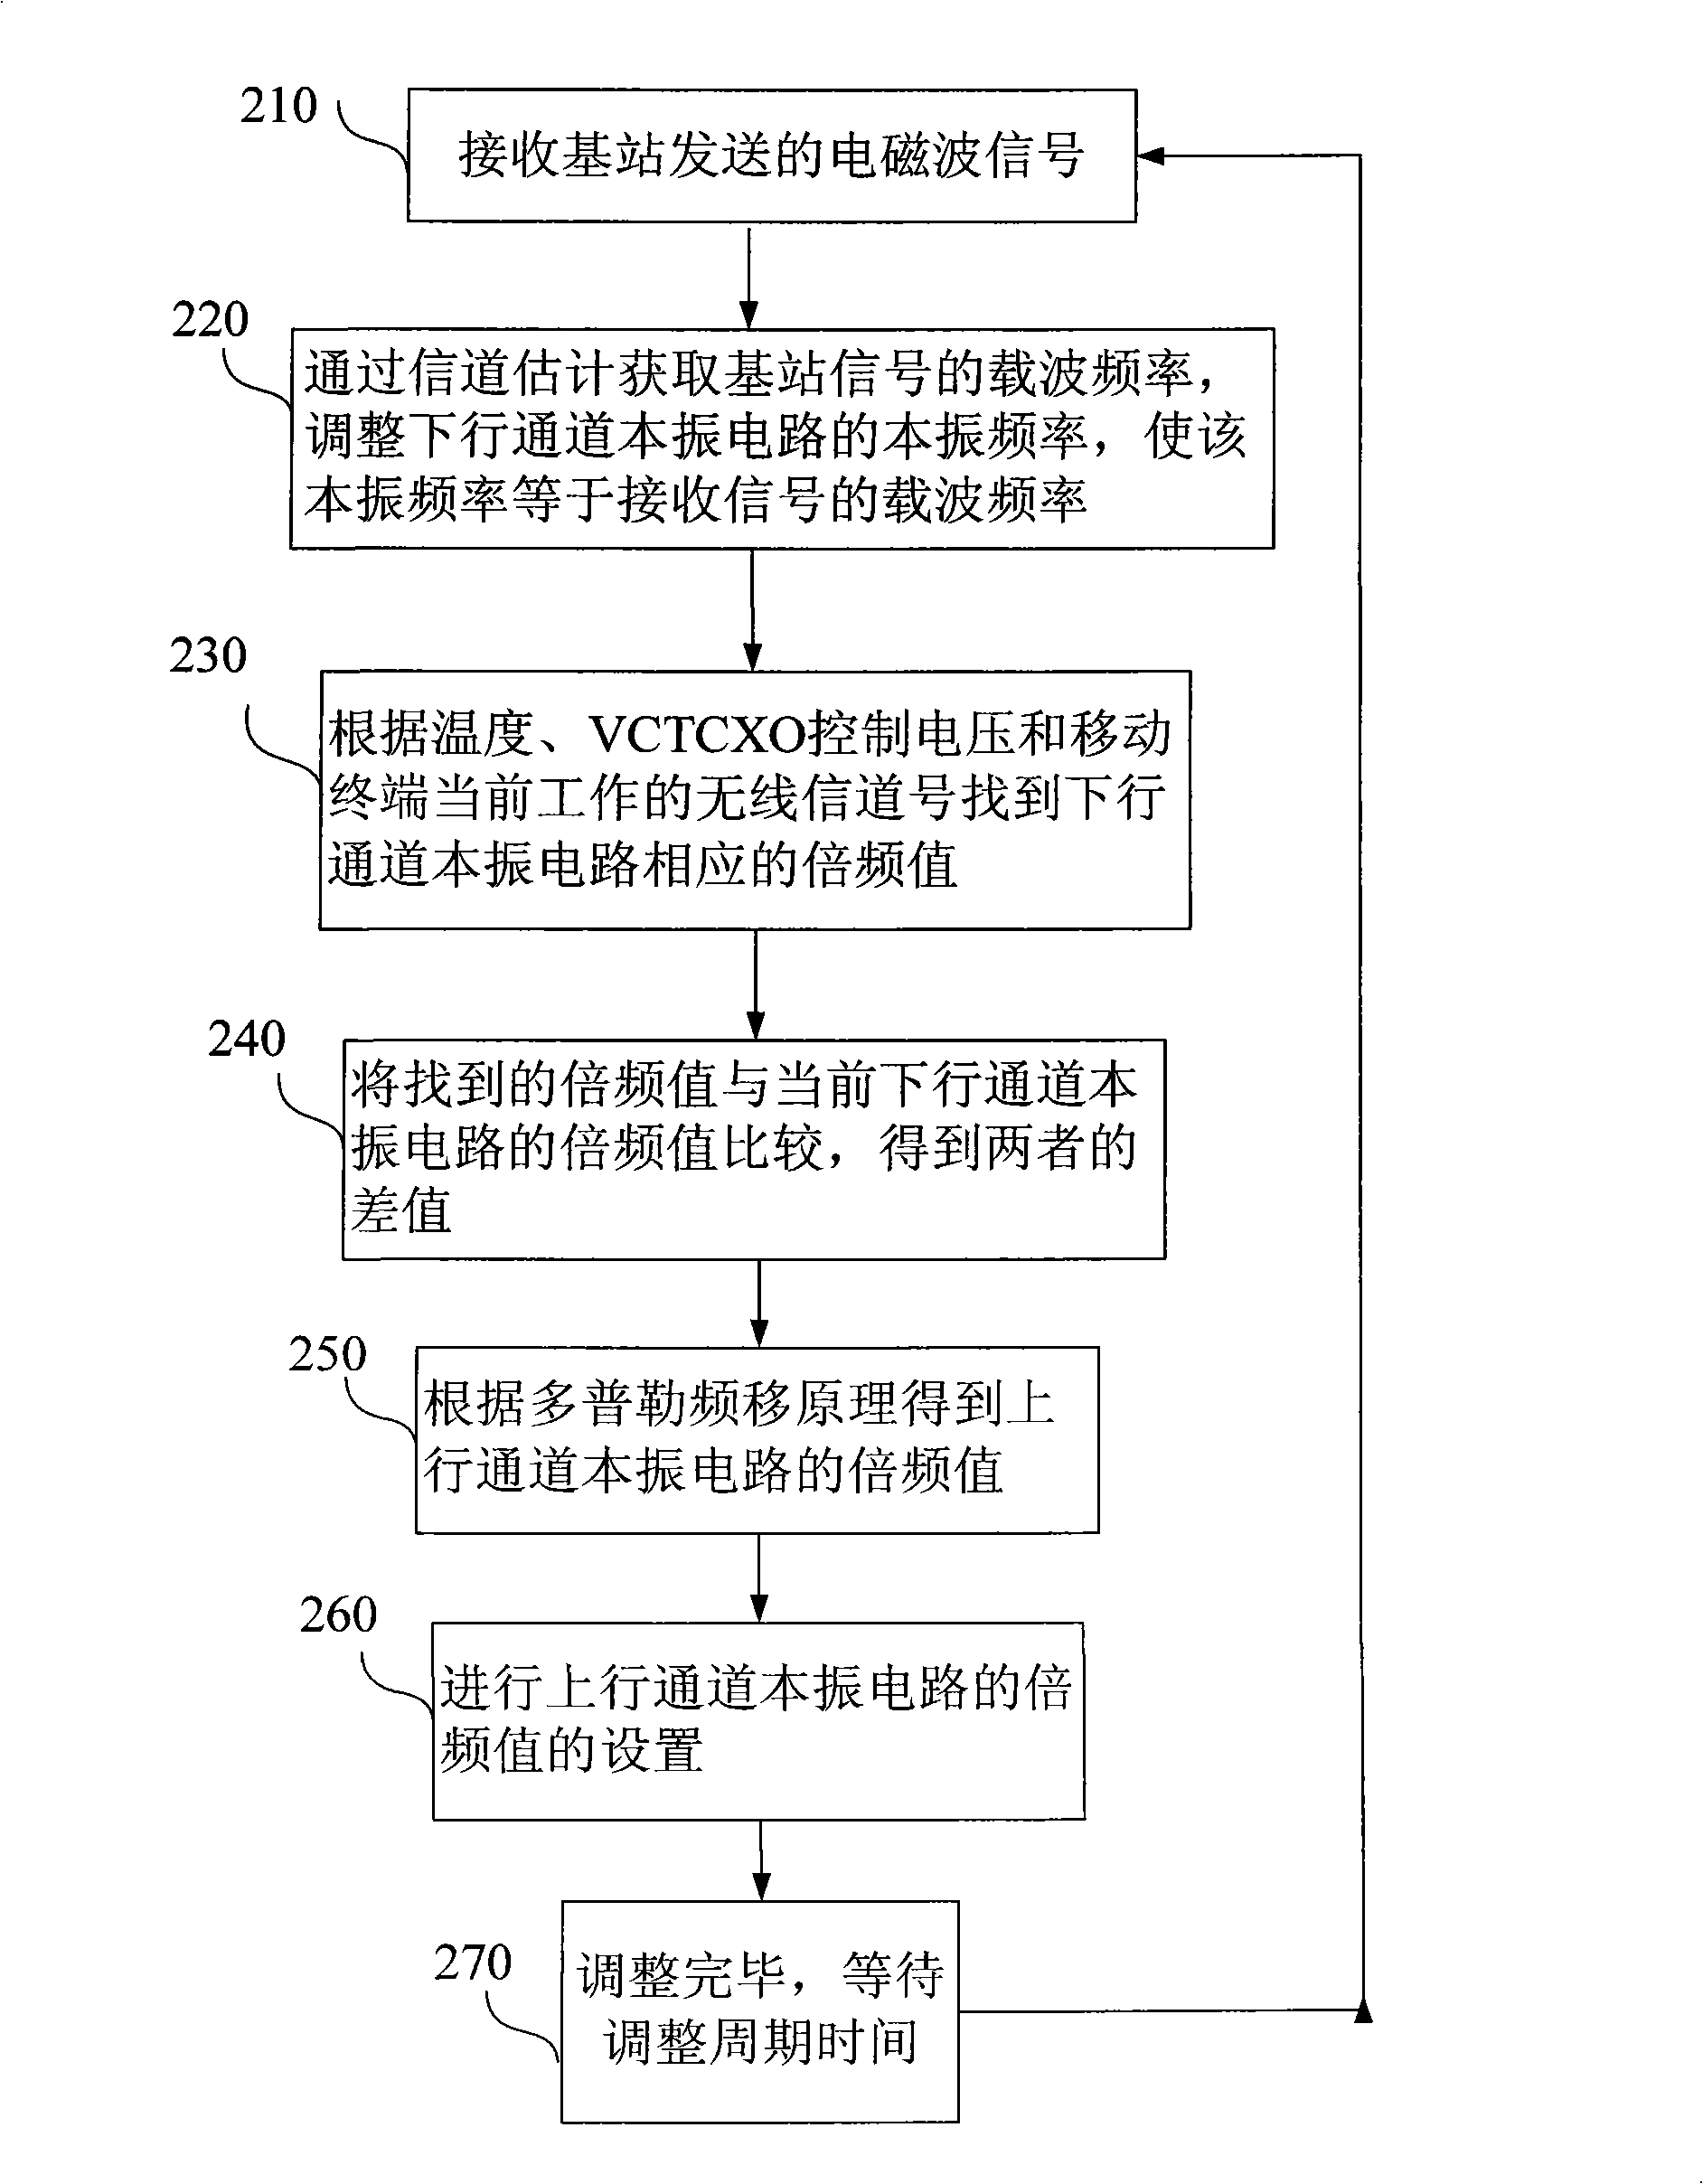 Mobile terminal and uplink channel local frequency regulation method